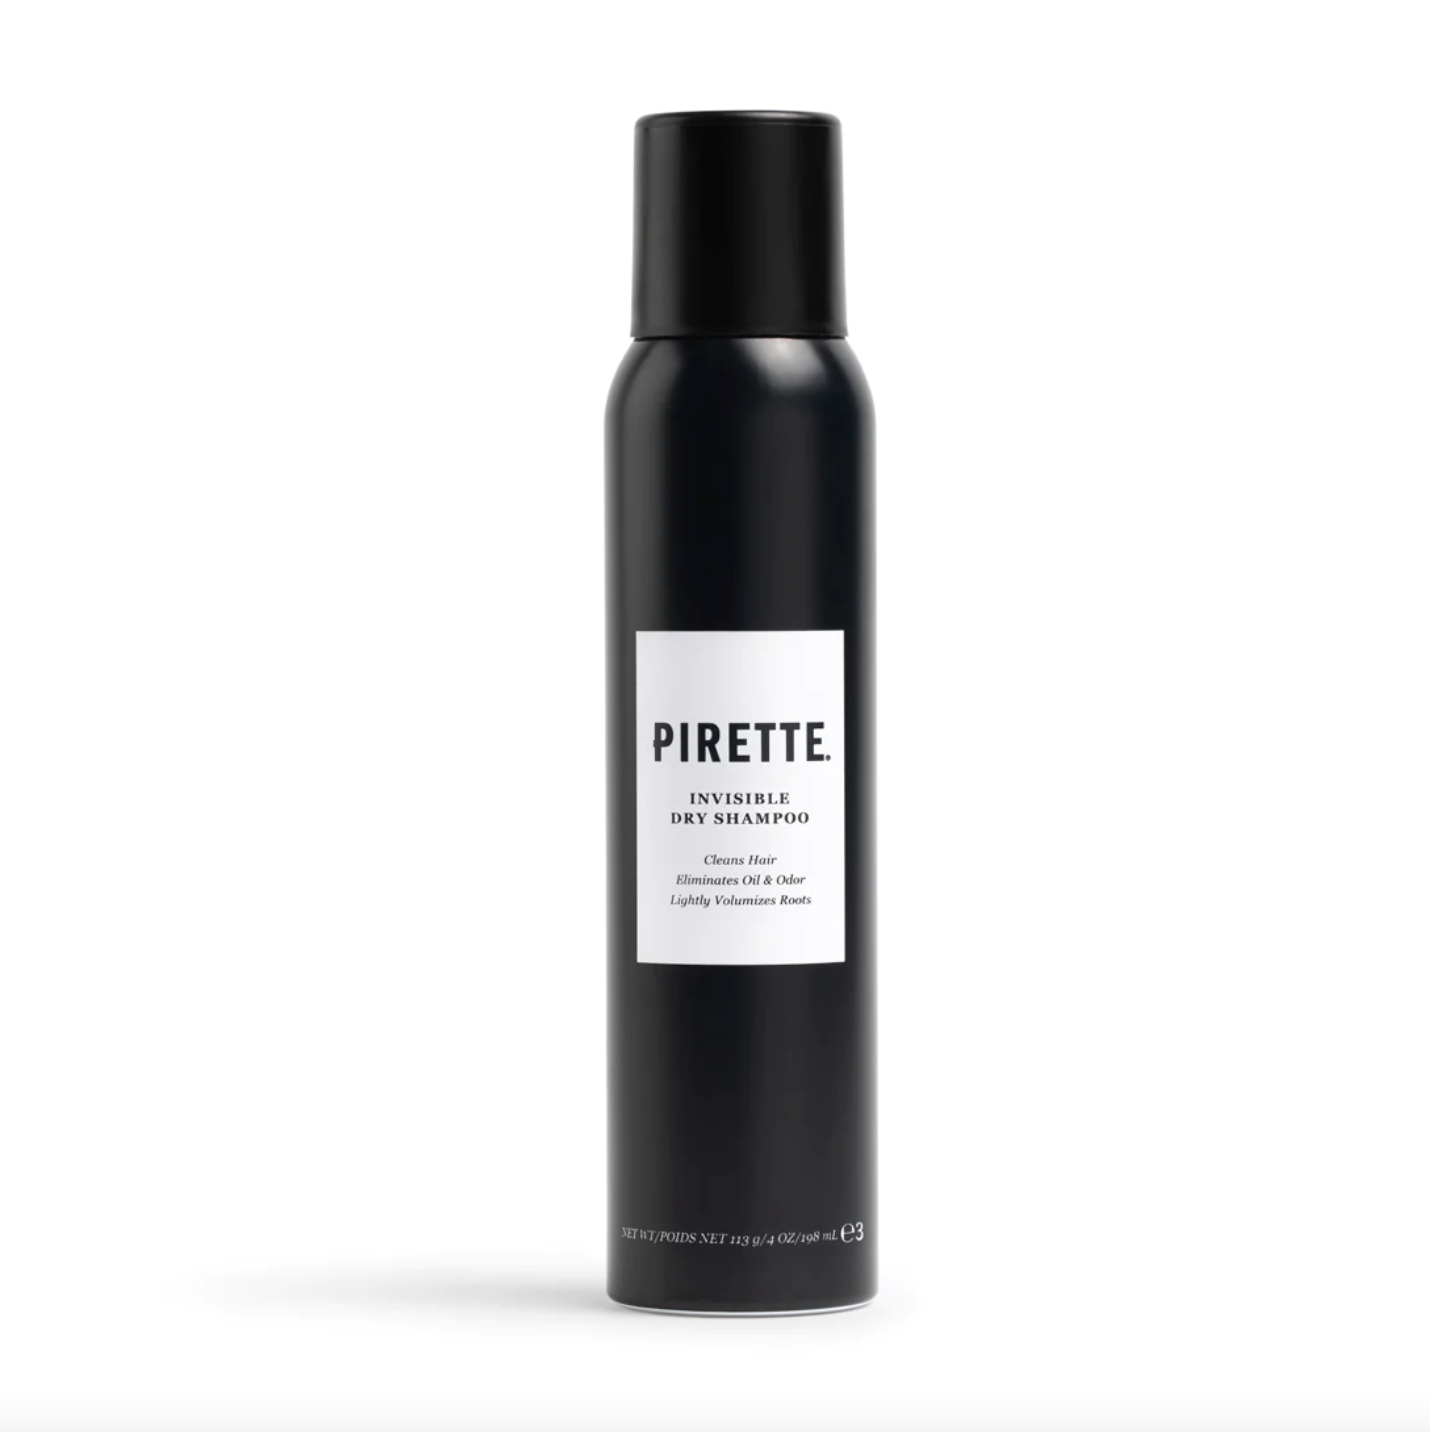 A black aerosol can with a white label that reads "Pirette. Pirette INVISIBLE DRY SHAMPOO. Clean Hair, Effortless All-day Style, Boosts Volume with Sunflower Seed Oil." The can has a matte finish and is sleek and cylindrical in shape.